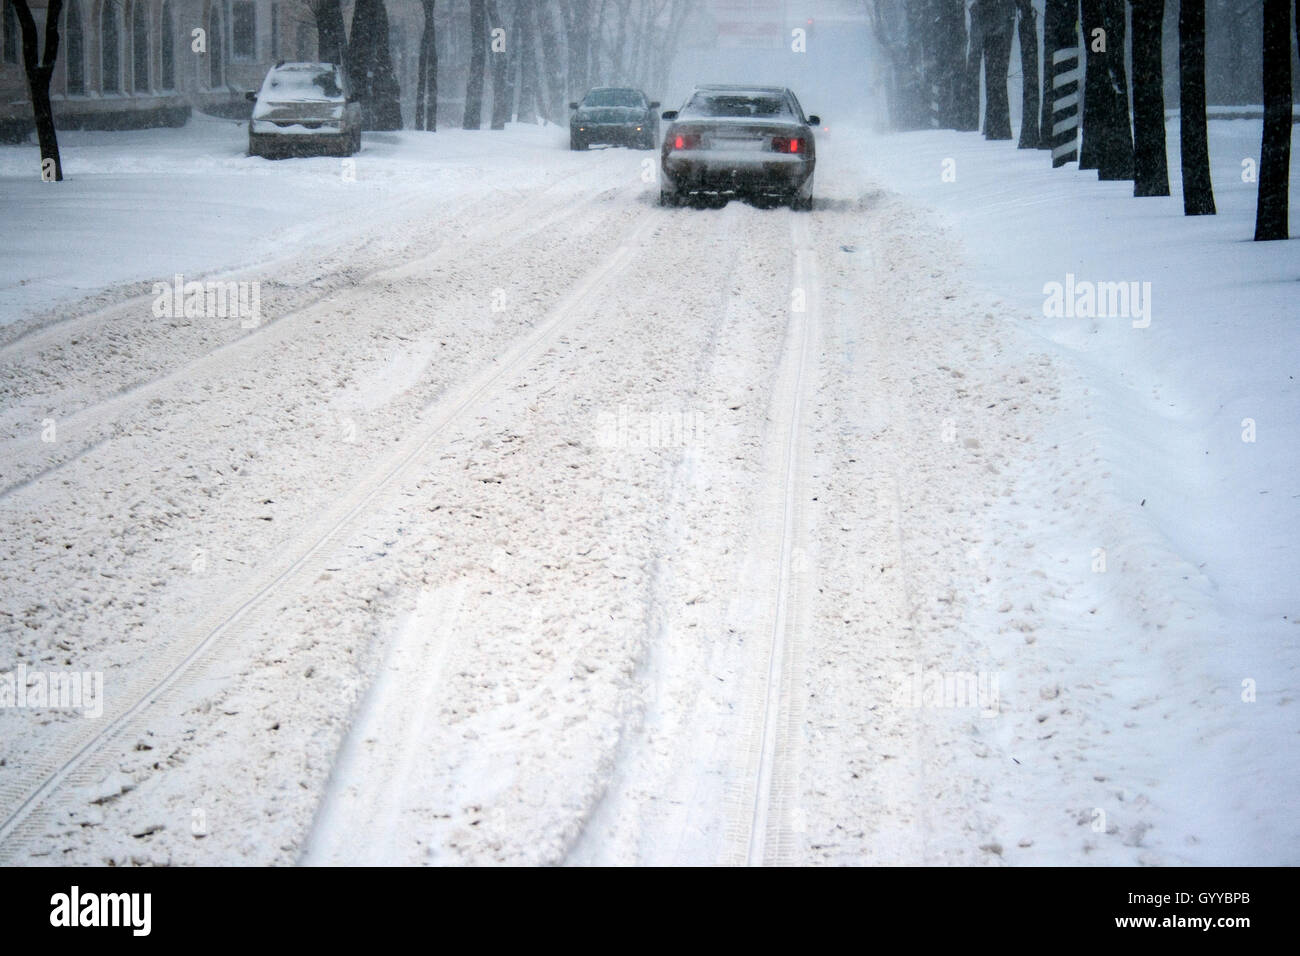 Cars driving on slippery road during heavy snowfall Stock Photo